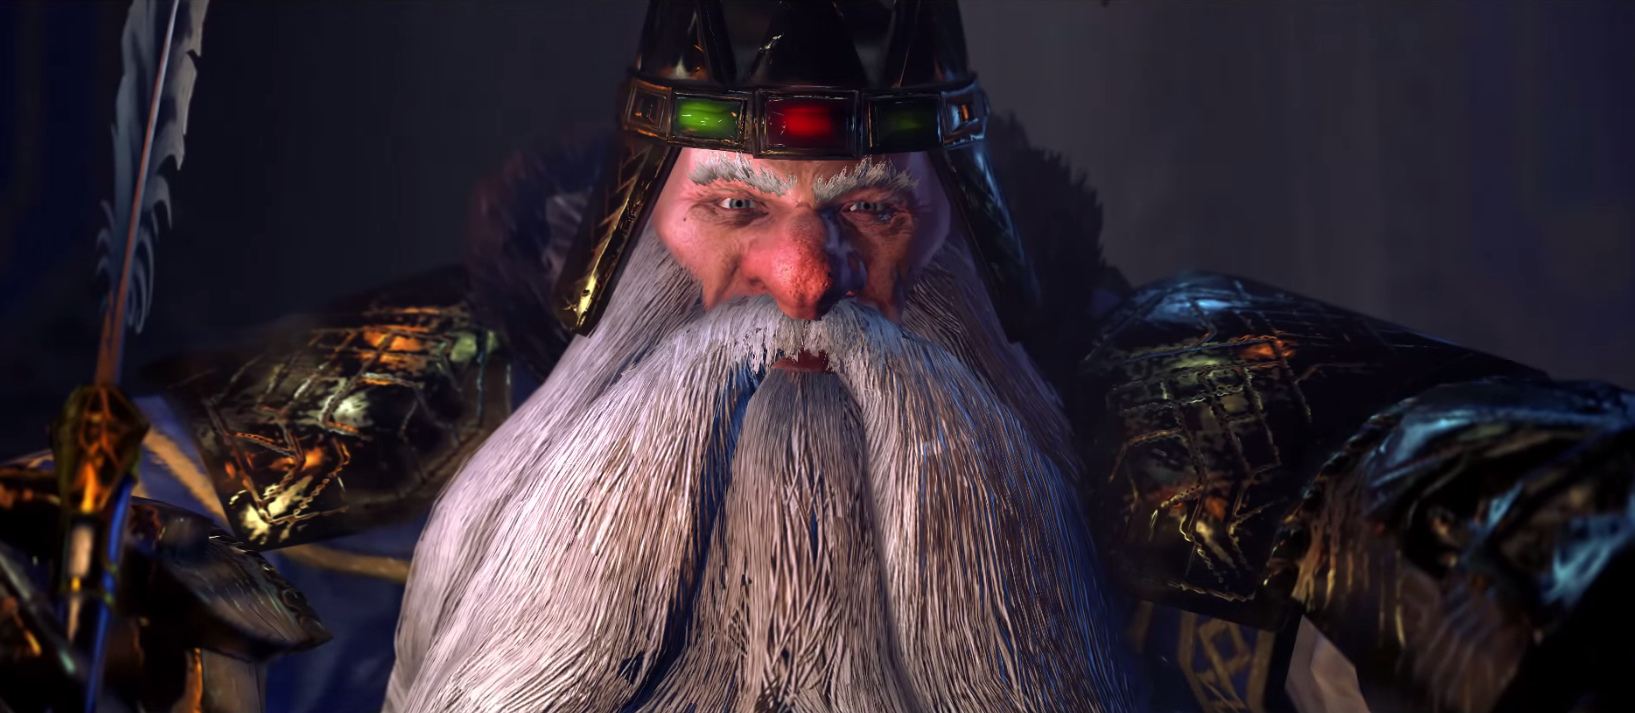 Revealed: “Total War: WARHAMMER” trailer for High King Thorgrim Grudgebearer - And he's got a lot of grudges to bear.